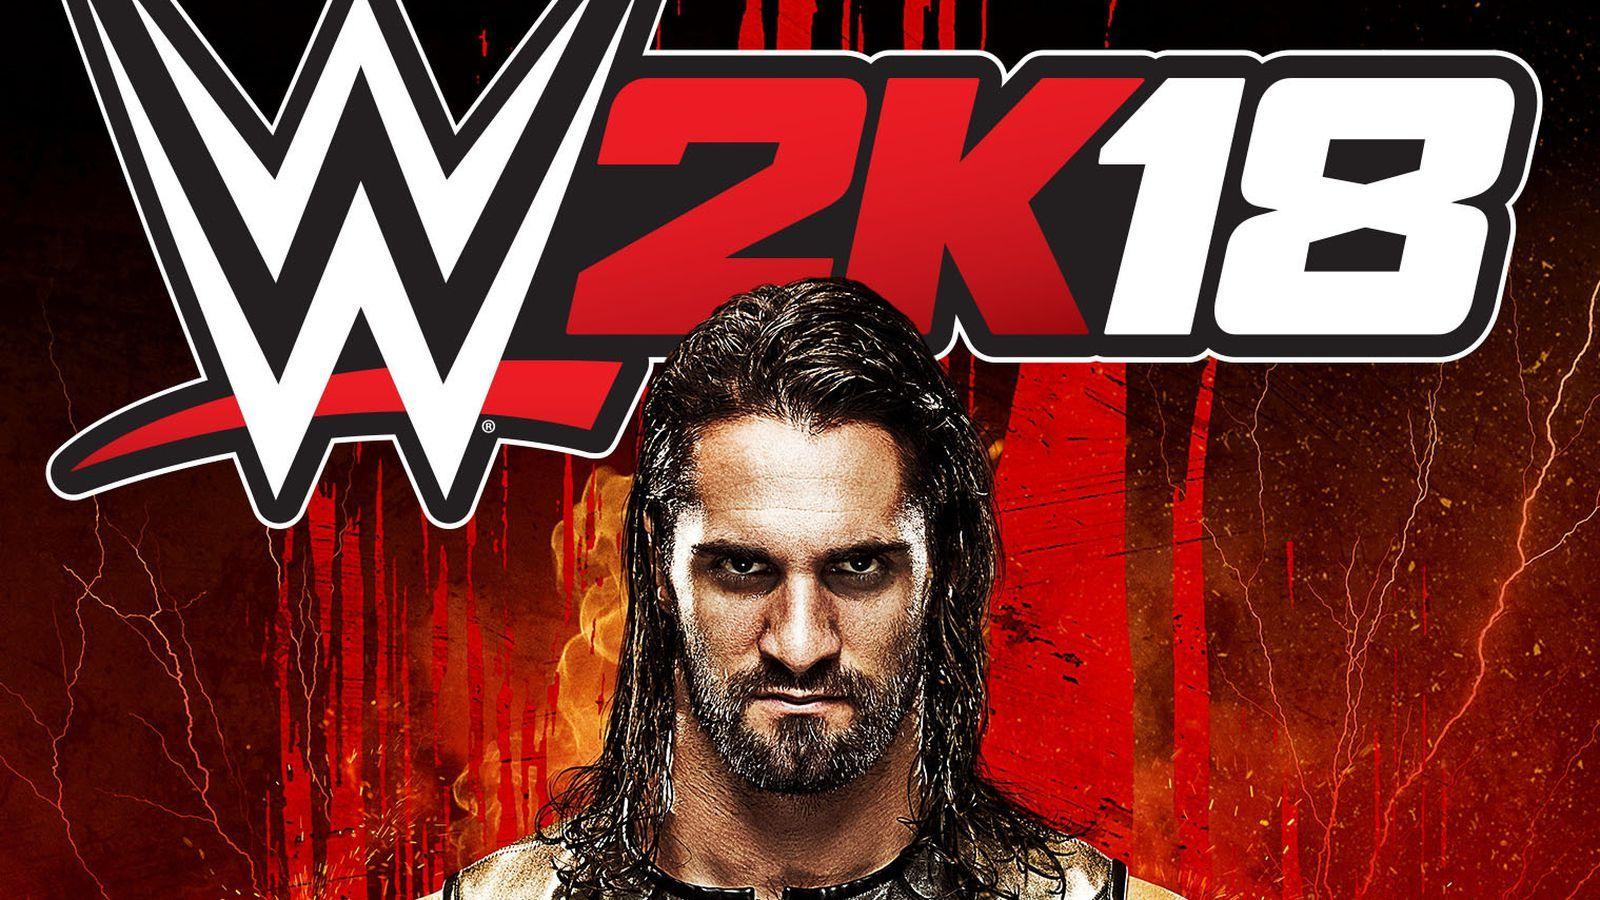 Seth Rollins is WWE 2K18's cover star